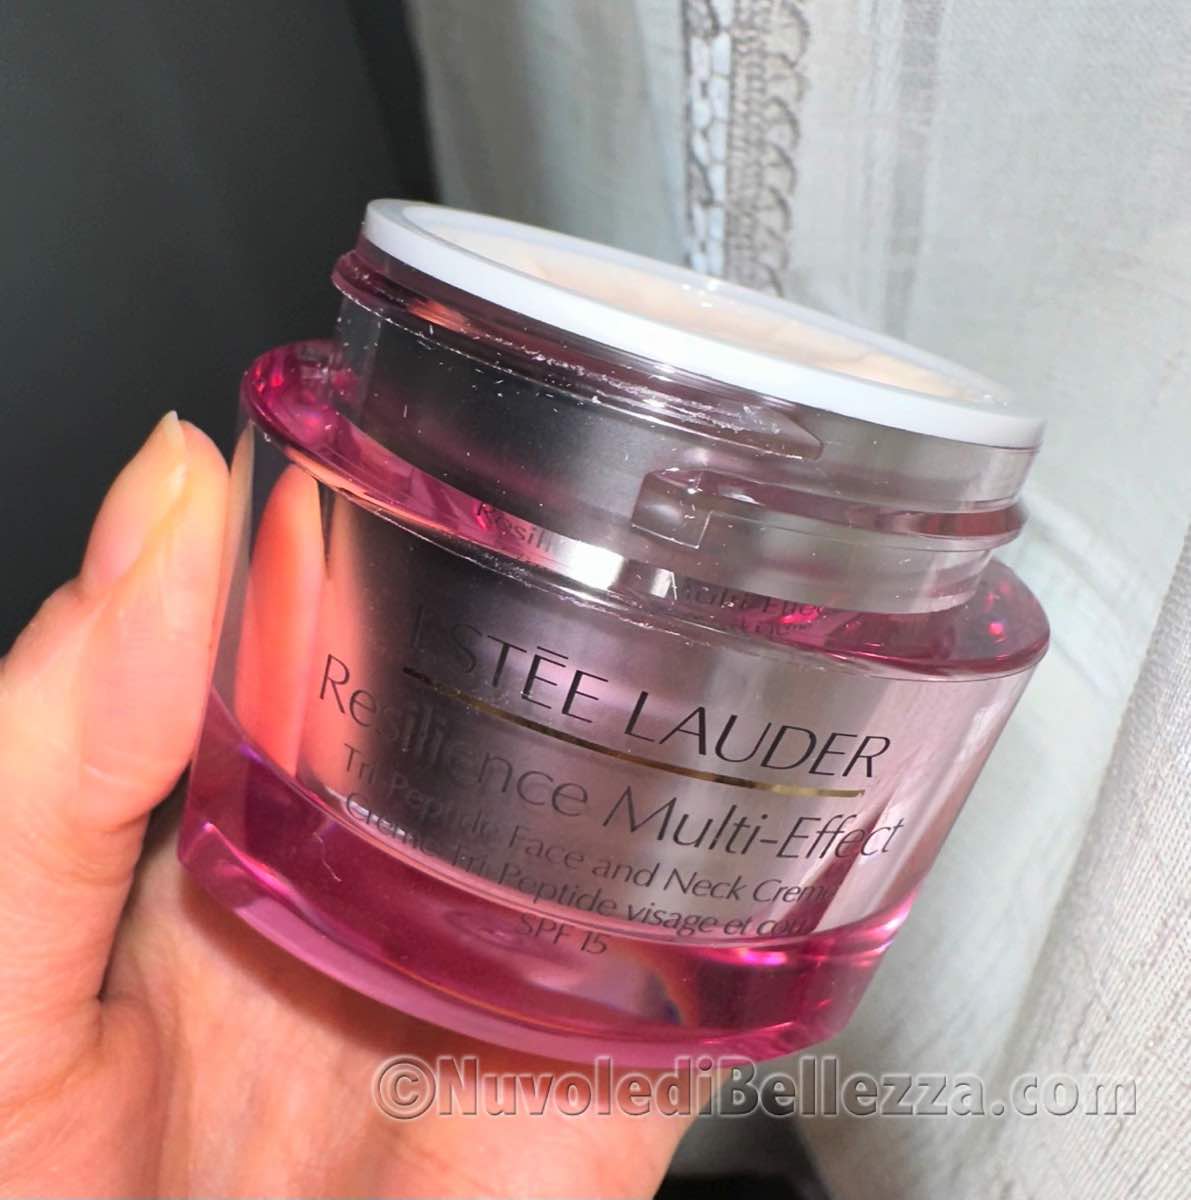 Recensione Estee Lauder Resilience Multi-Effect Firming Lifting SPF 15